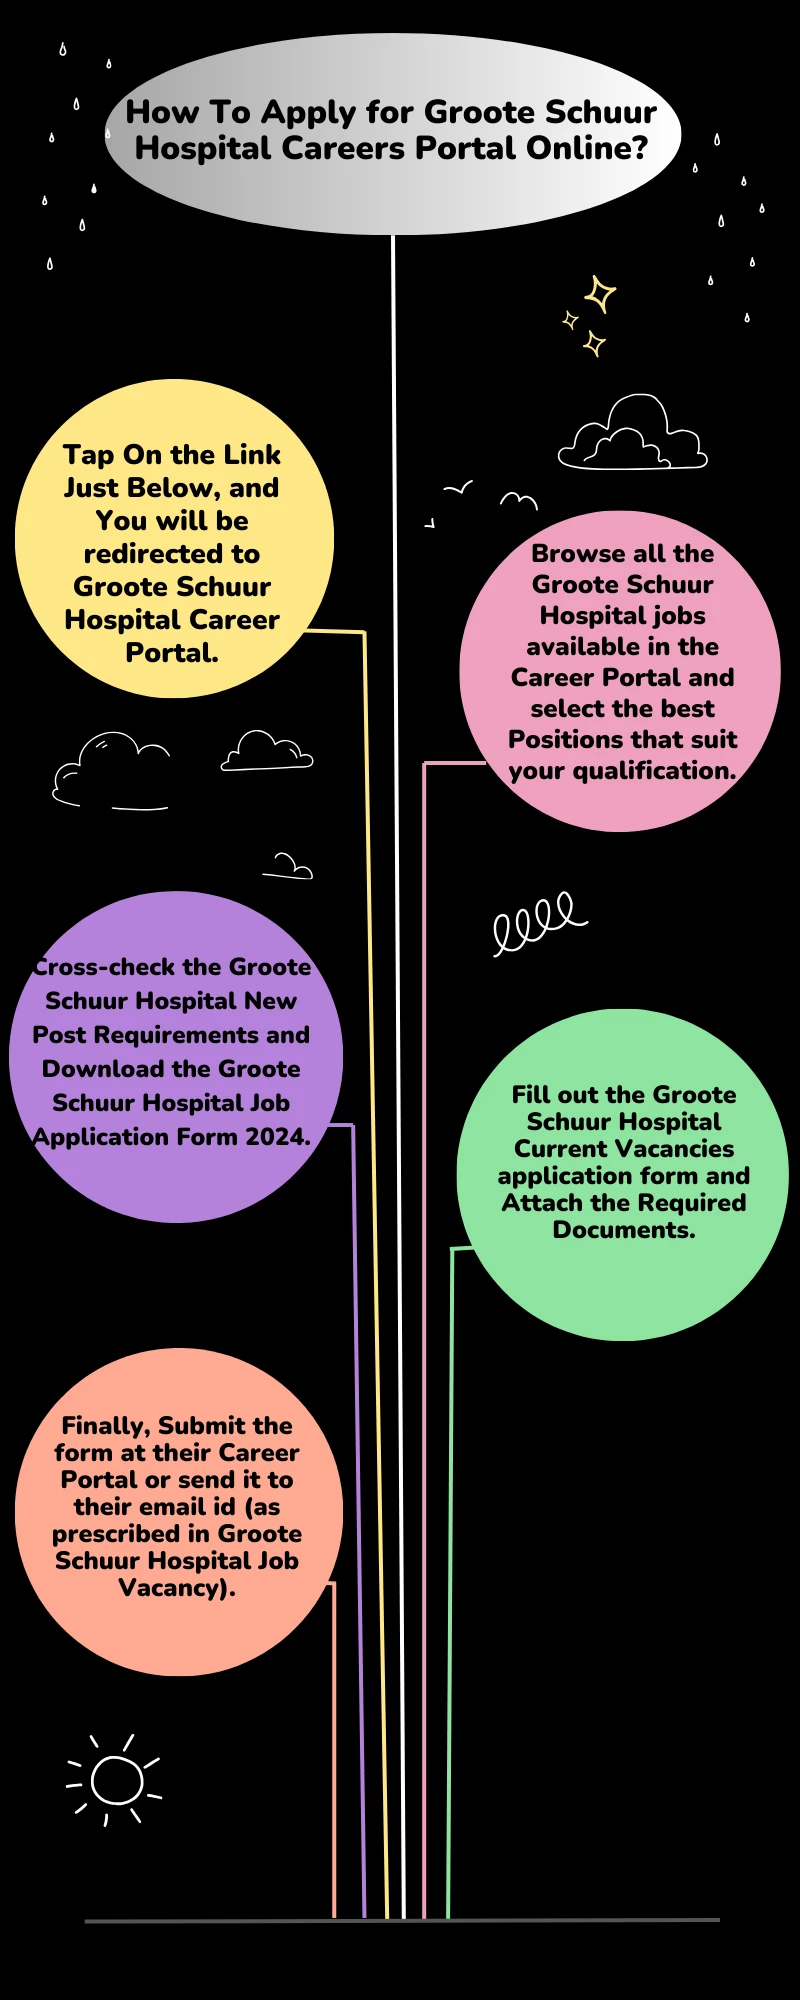 How To Apply for Groote Schuur Hospital Careers Portal Online?